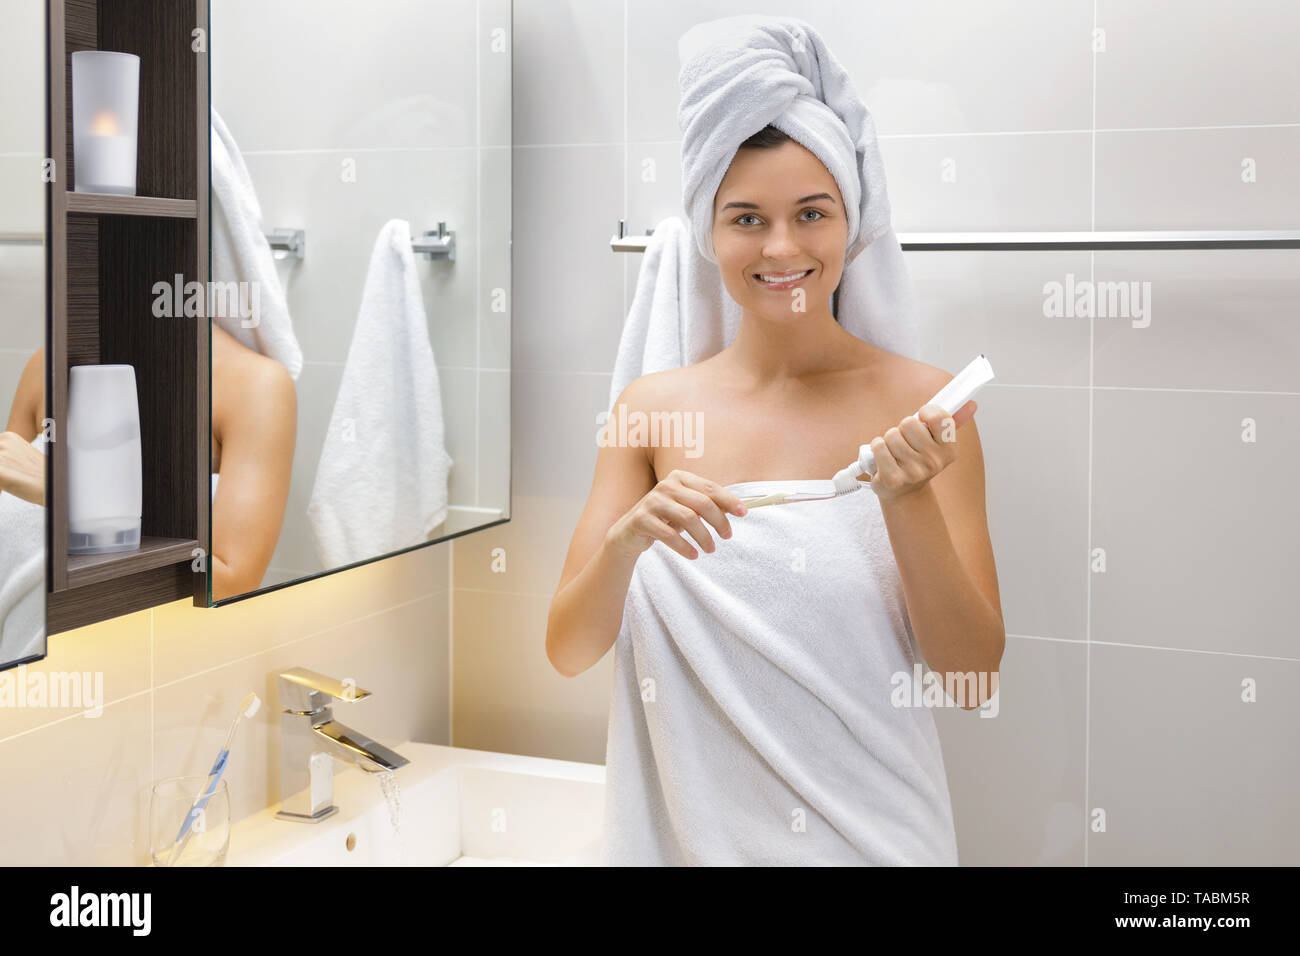 Woman  in the bathroom during her daily tooth brushing routine Stock Photo